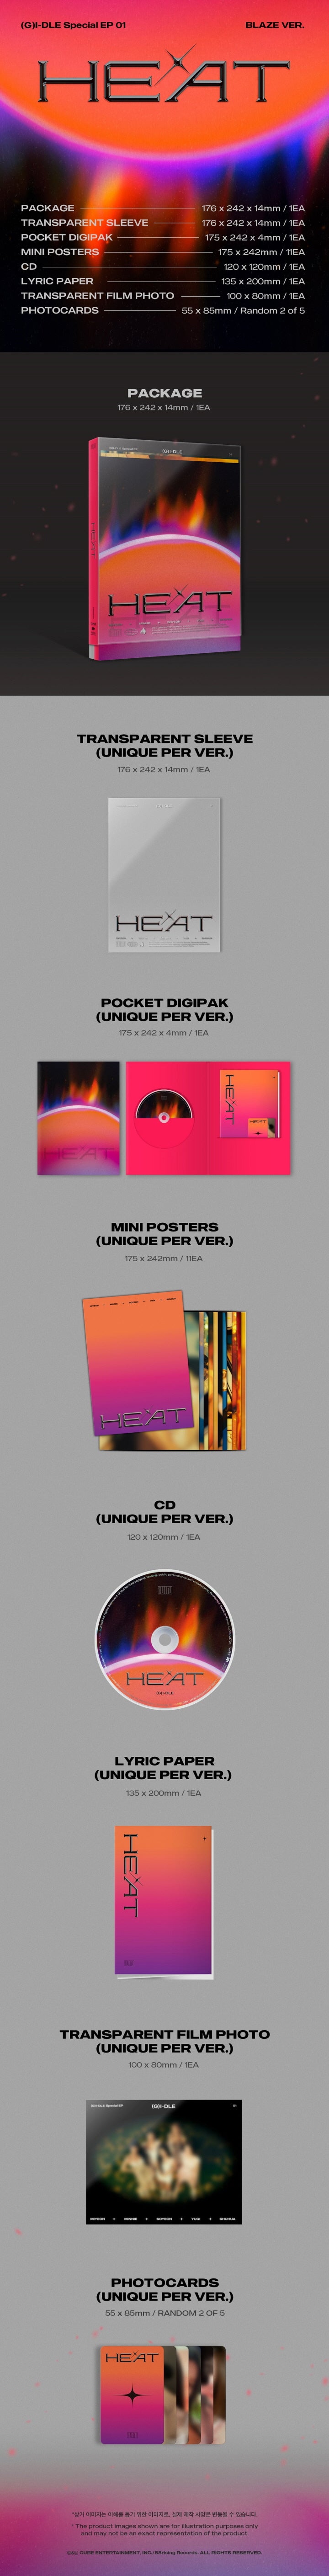 1 CD
11 Mini Posters
1 Lyric Paper
1 Transparent Film Photo
2 Photo Cards (random out of 5 types)